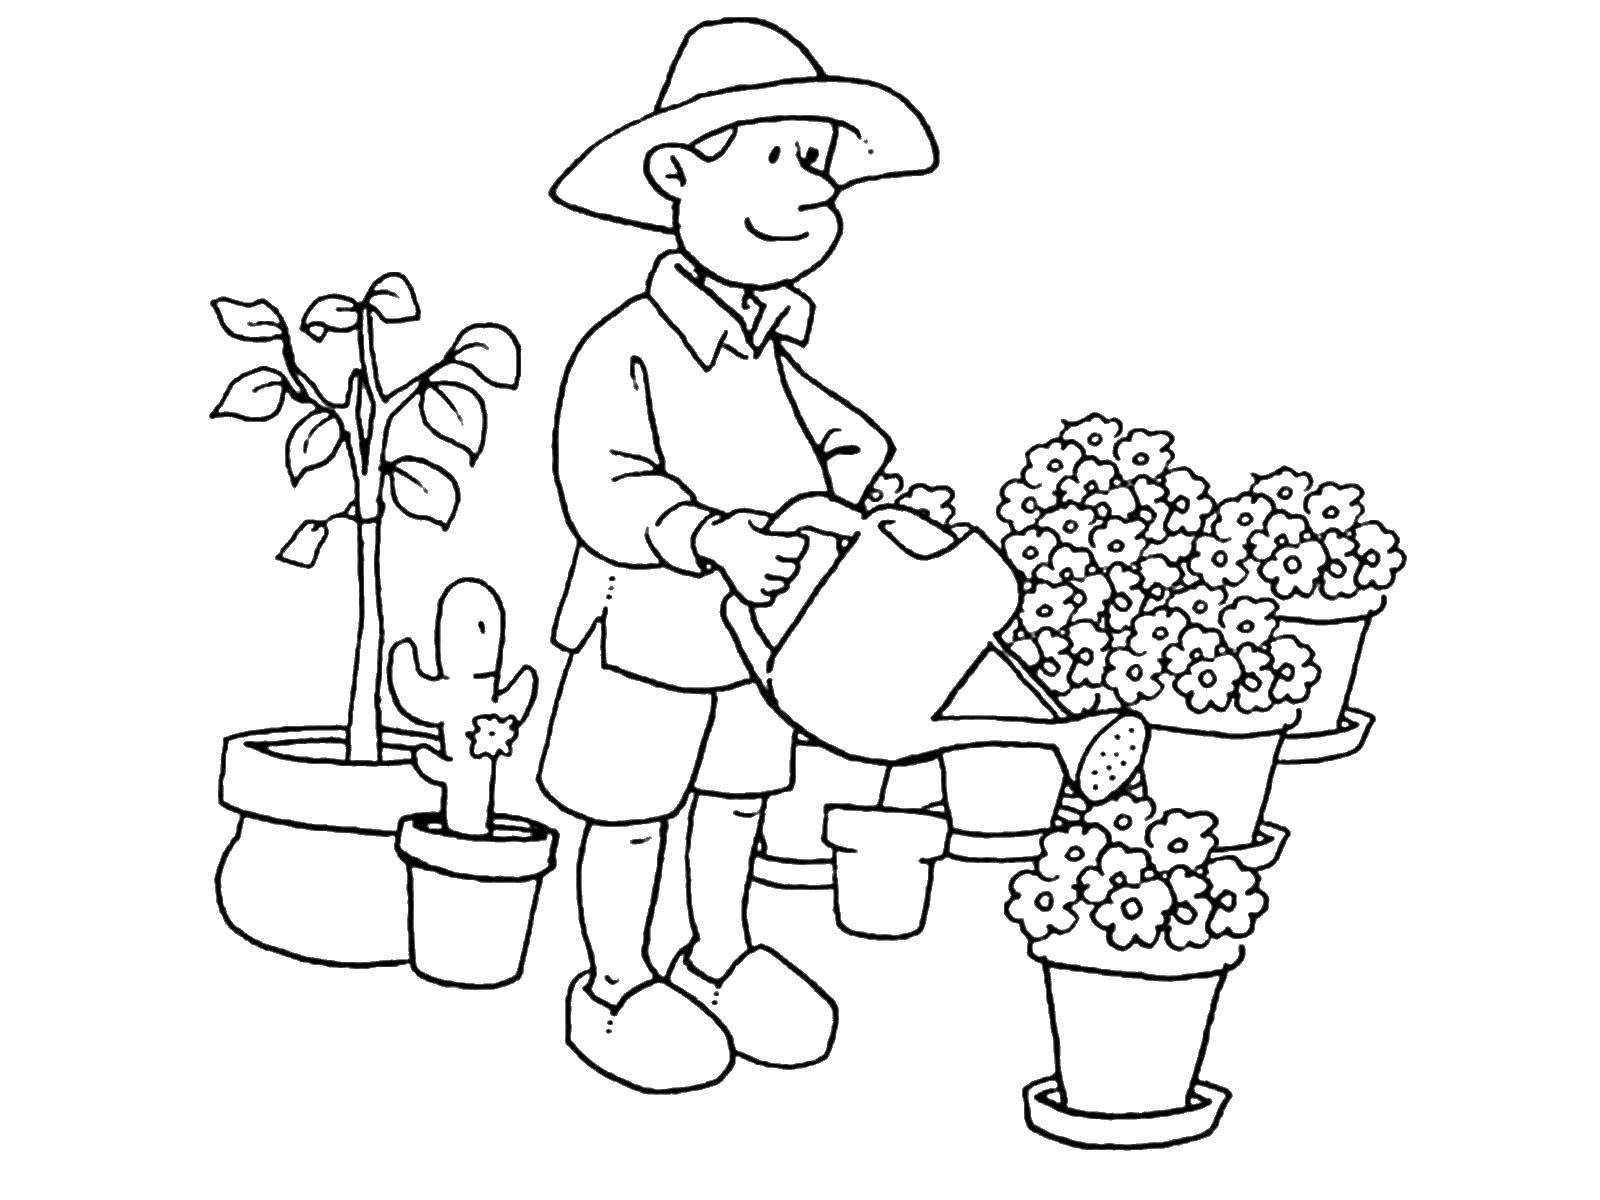 Coloring The gardener is watering the flowers. Category a profession. Tags:  profession, gardener, flowers.